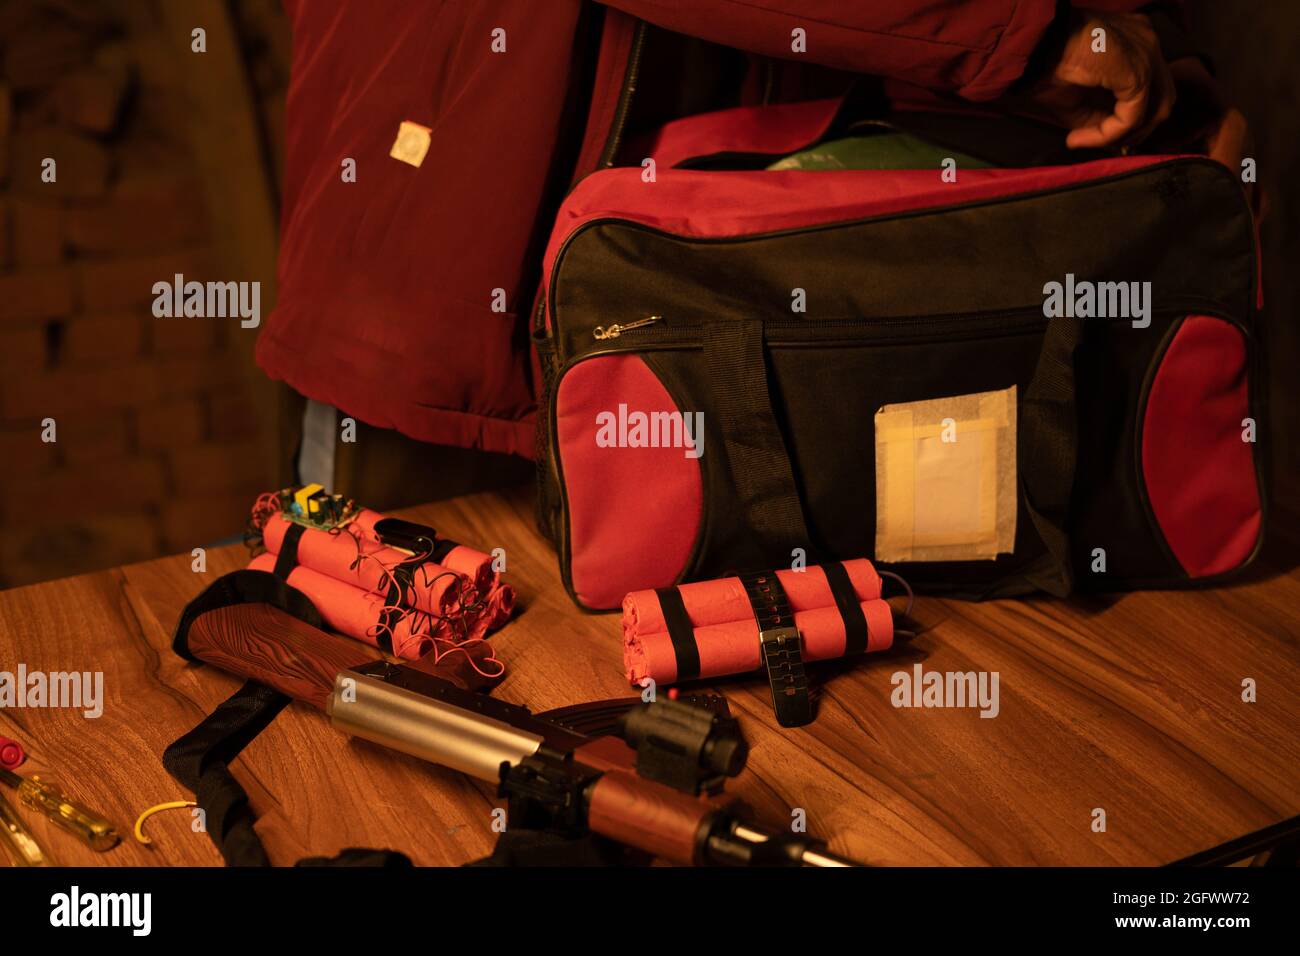 Focus on red dynamite, unrecognizable militent or soldier preparing by placing time bomb with dynamite and gun inside the bag Stock Photo